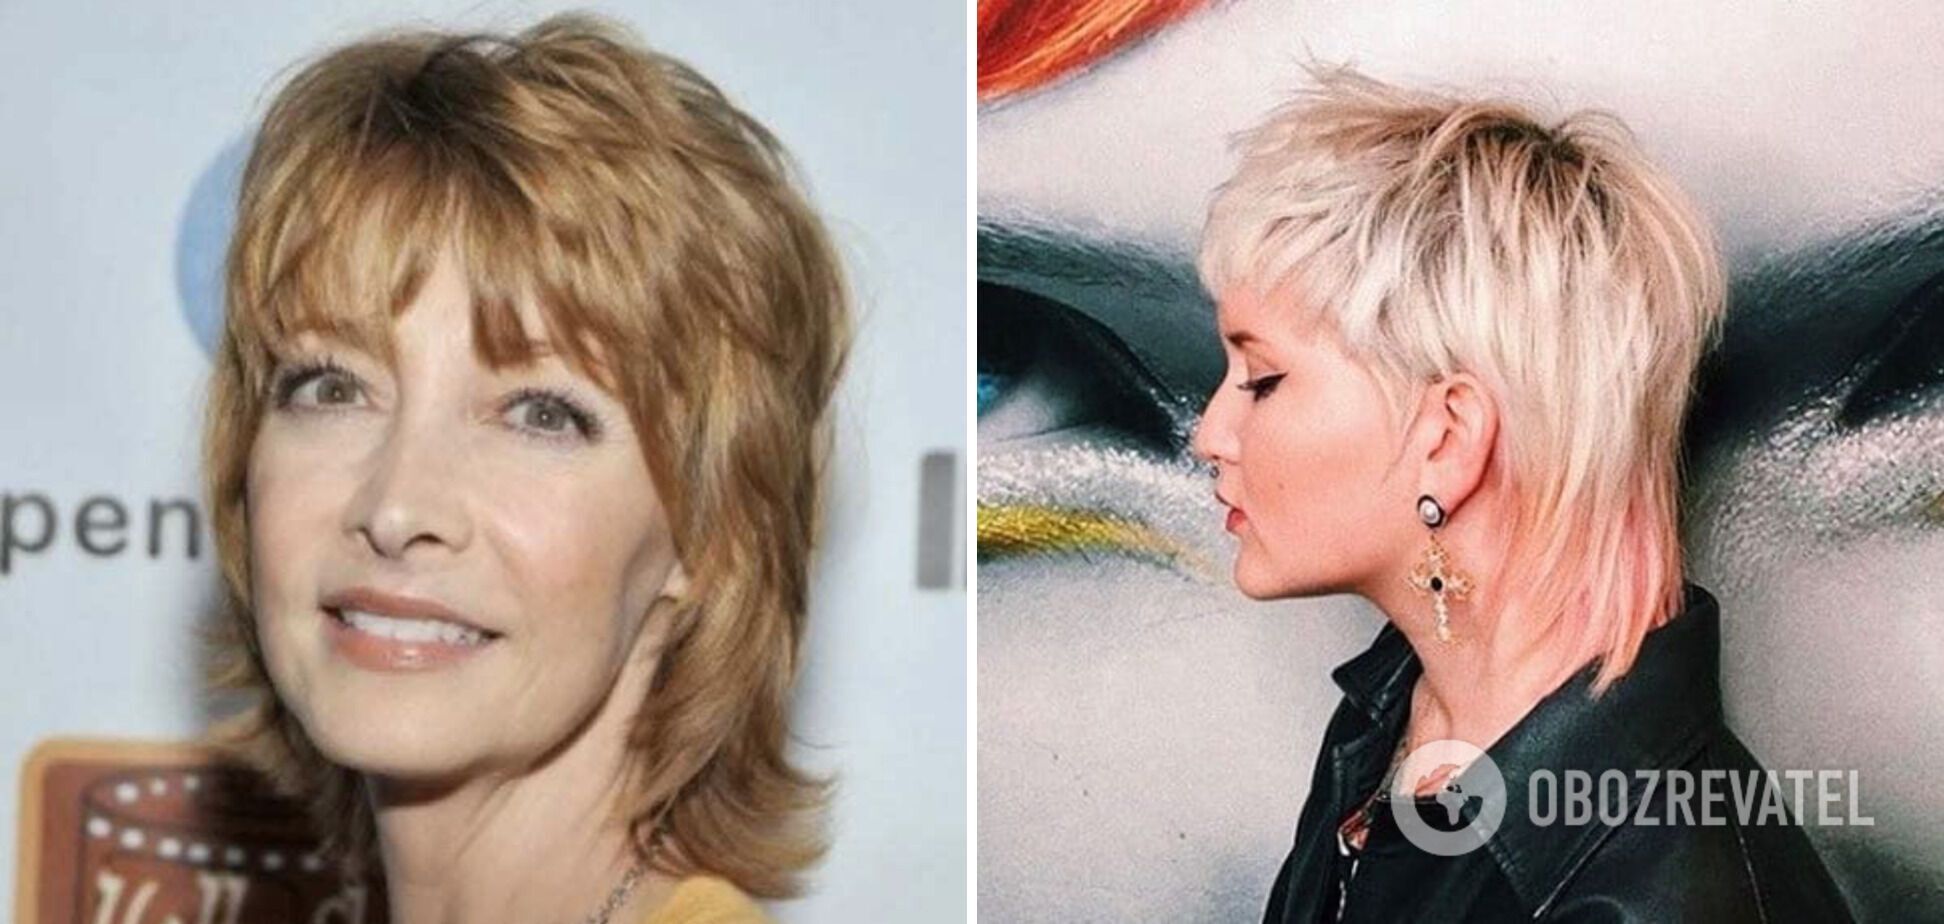 Hairstyle of the 70s is no longer in fashion